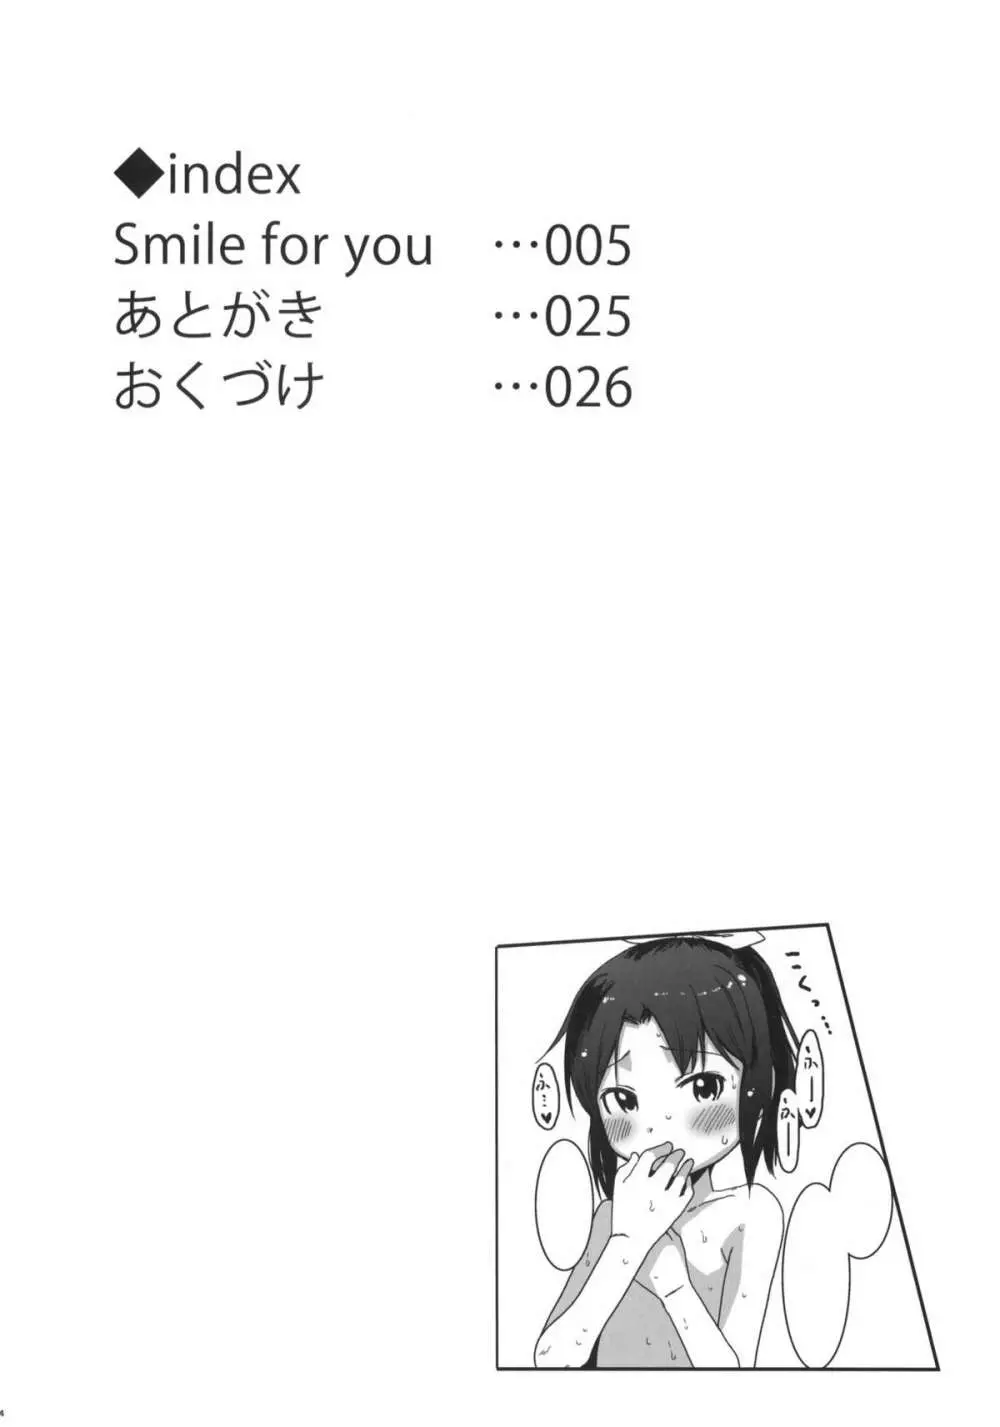 SMILE FOR YOU 4 3ページ